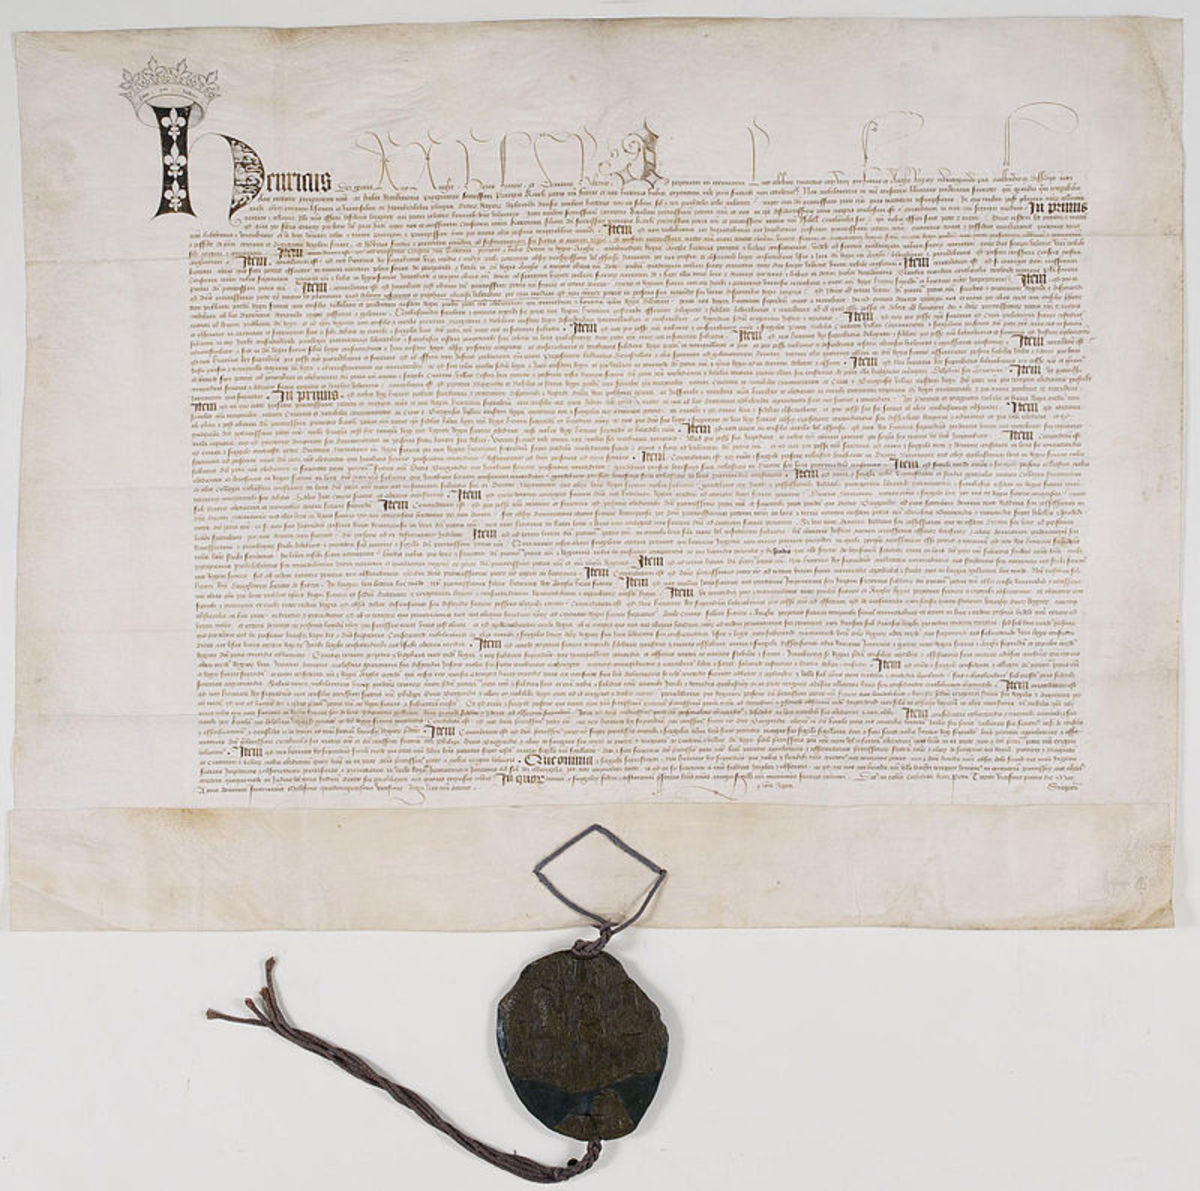 The ratified 1520 Treaty of Troyes.